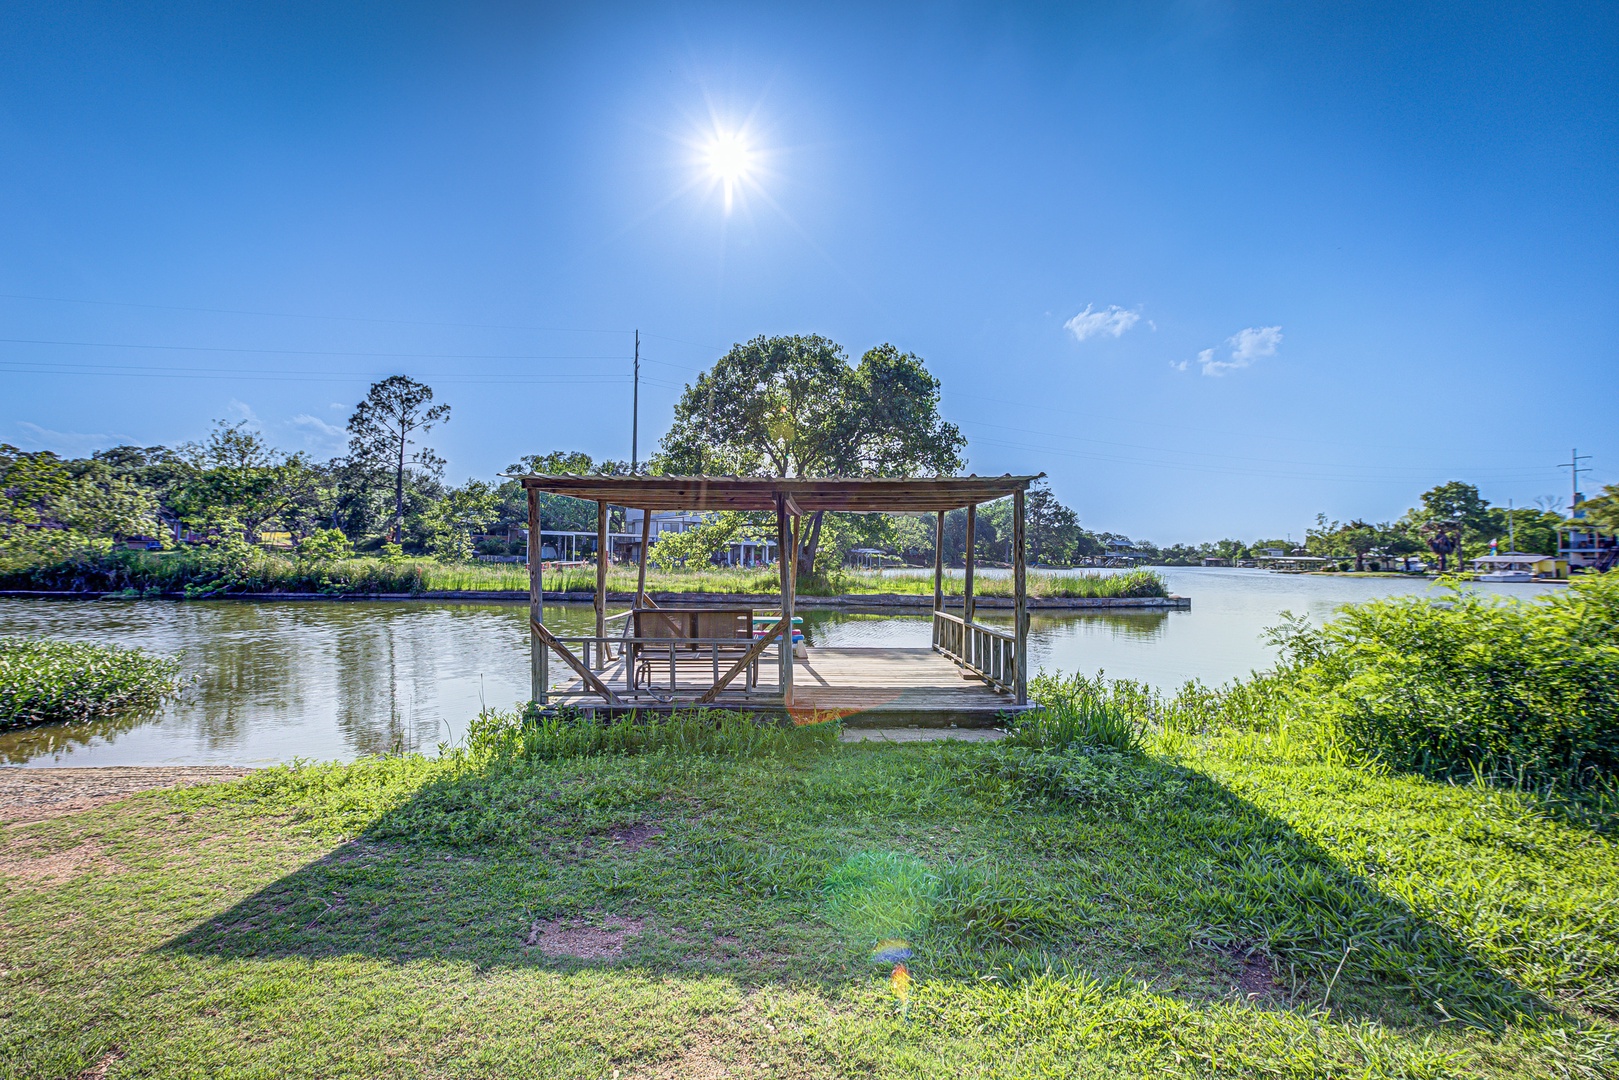 Enjoy a waterside picnic or an evening cocktail on the floating dock!